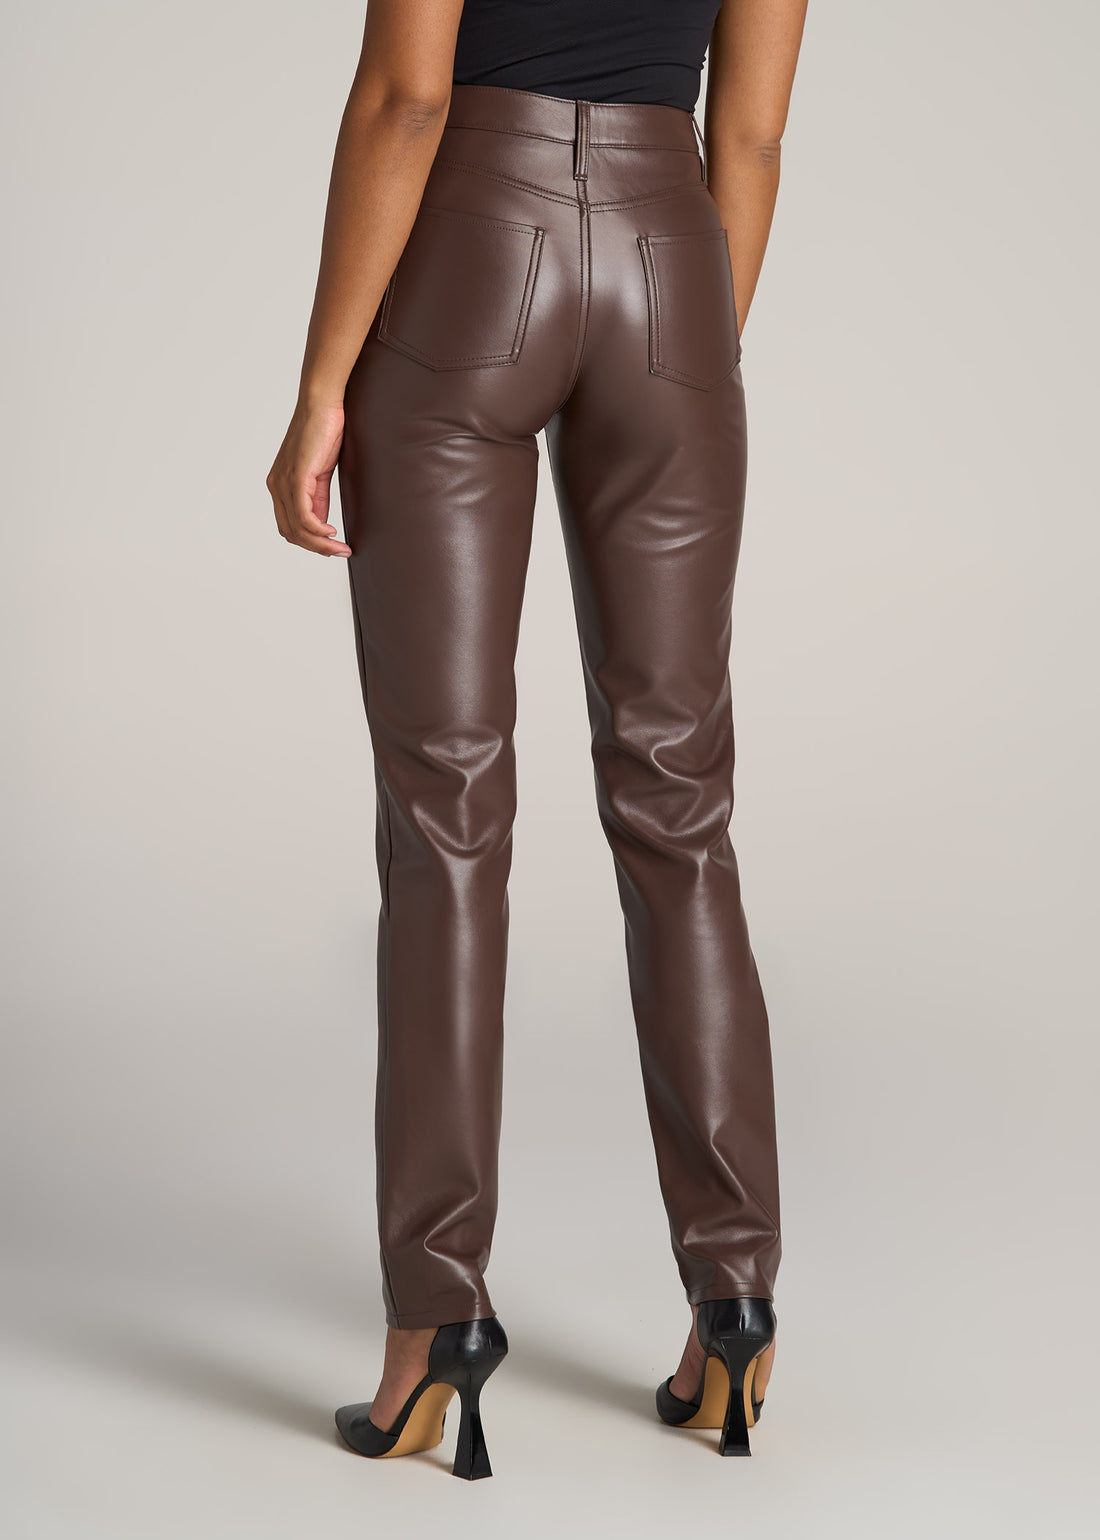 Faux Leather Slim Pants For Tall Women American Tall 5035